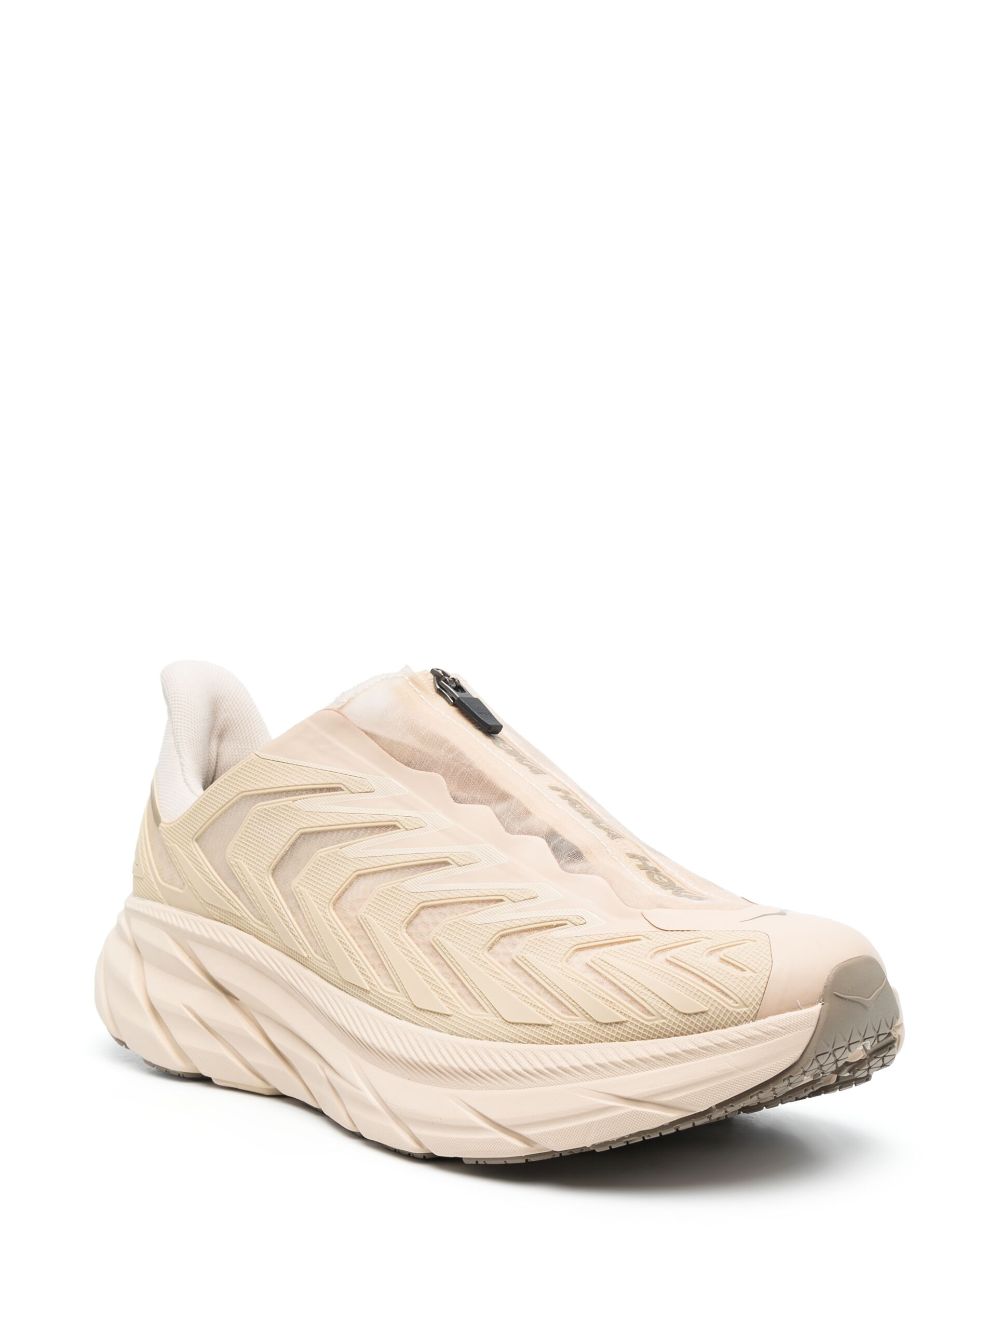 Hoka One One Project Clifton sneakers met rits - Beige